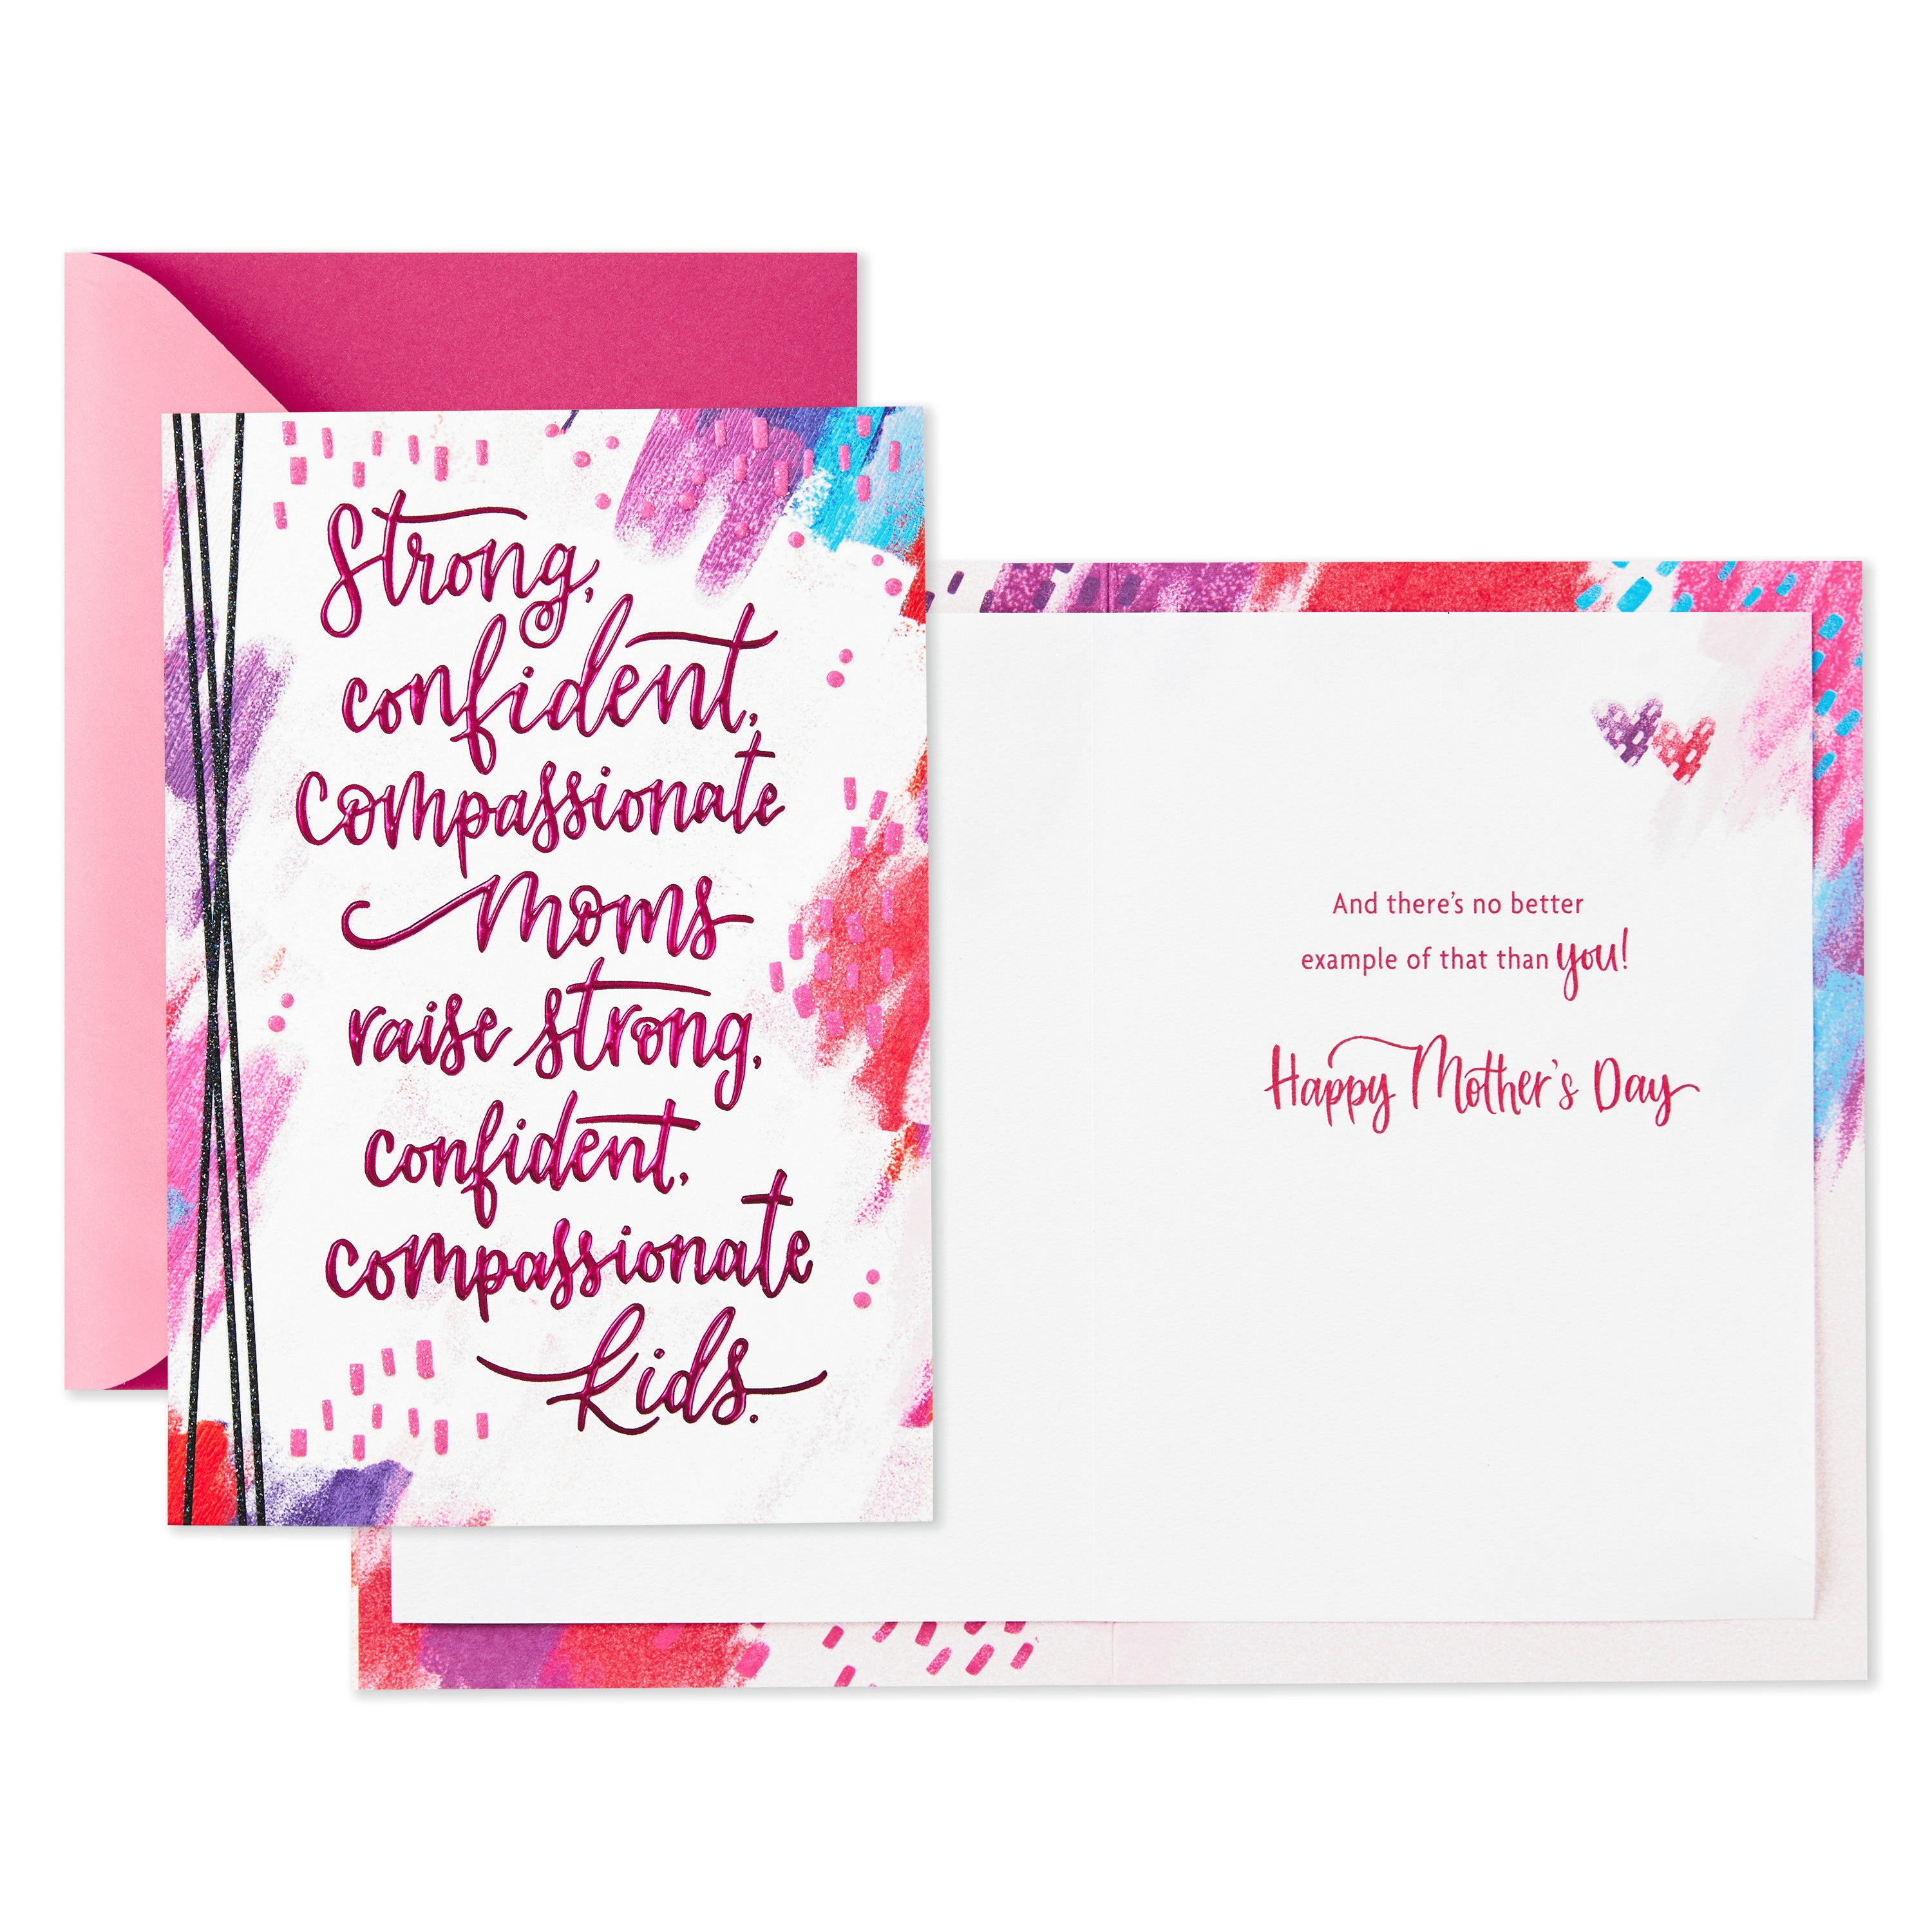 Pack of 3 Assorted Mothers Day Cards (Moms Run the World)